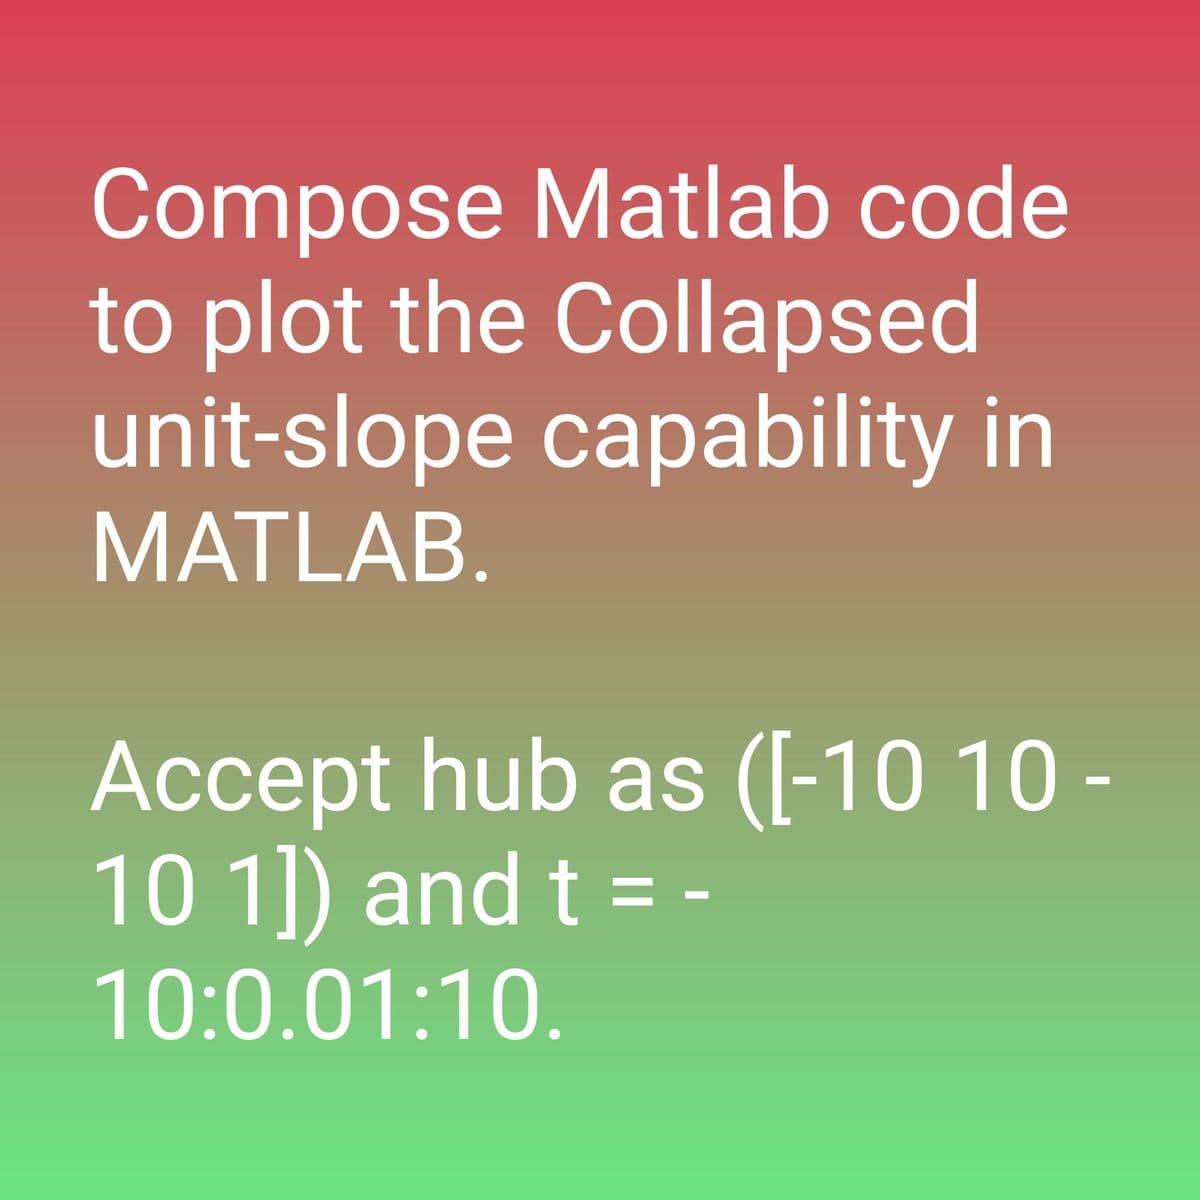 Compose Matlab code
to plot the Collapsed
unit-slope capability in
MATLAB.
Accept hub as ([-10 10 -
10 1]) and t = -
10:0.01:10.